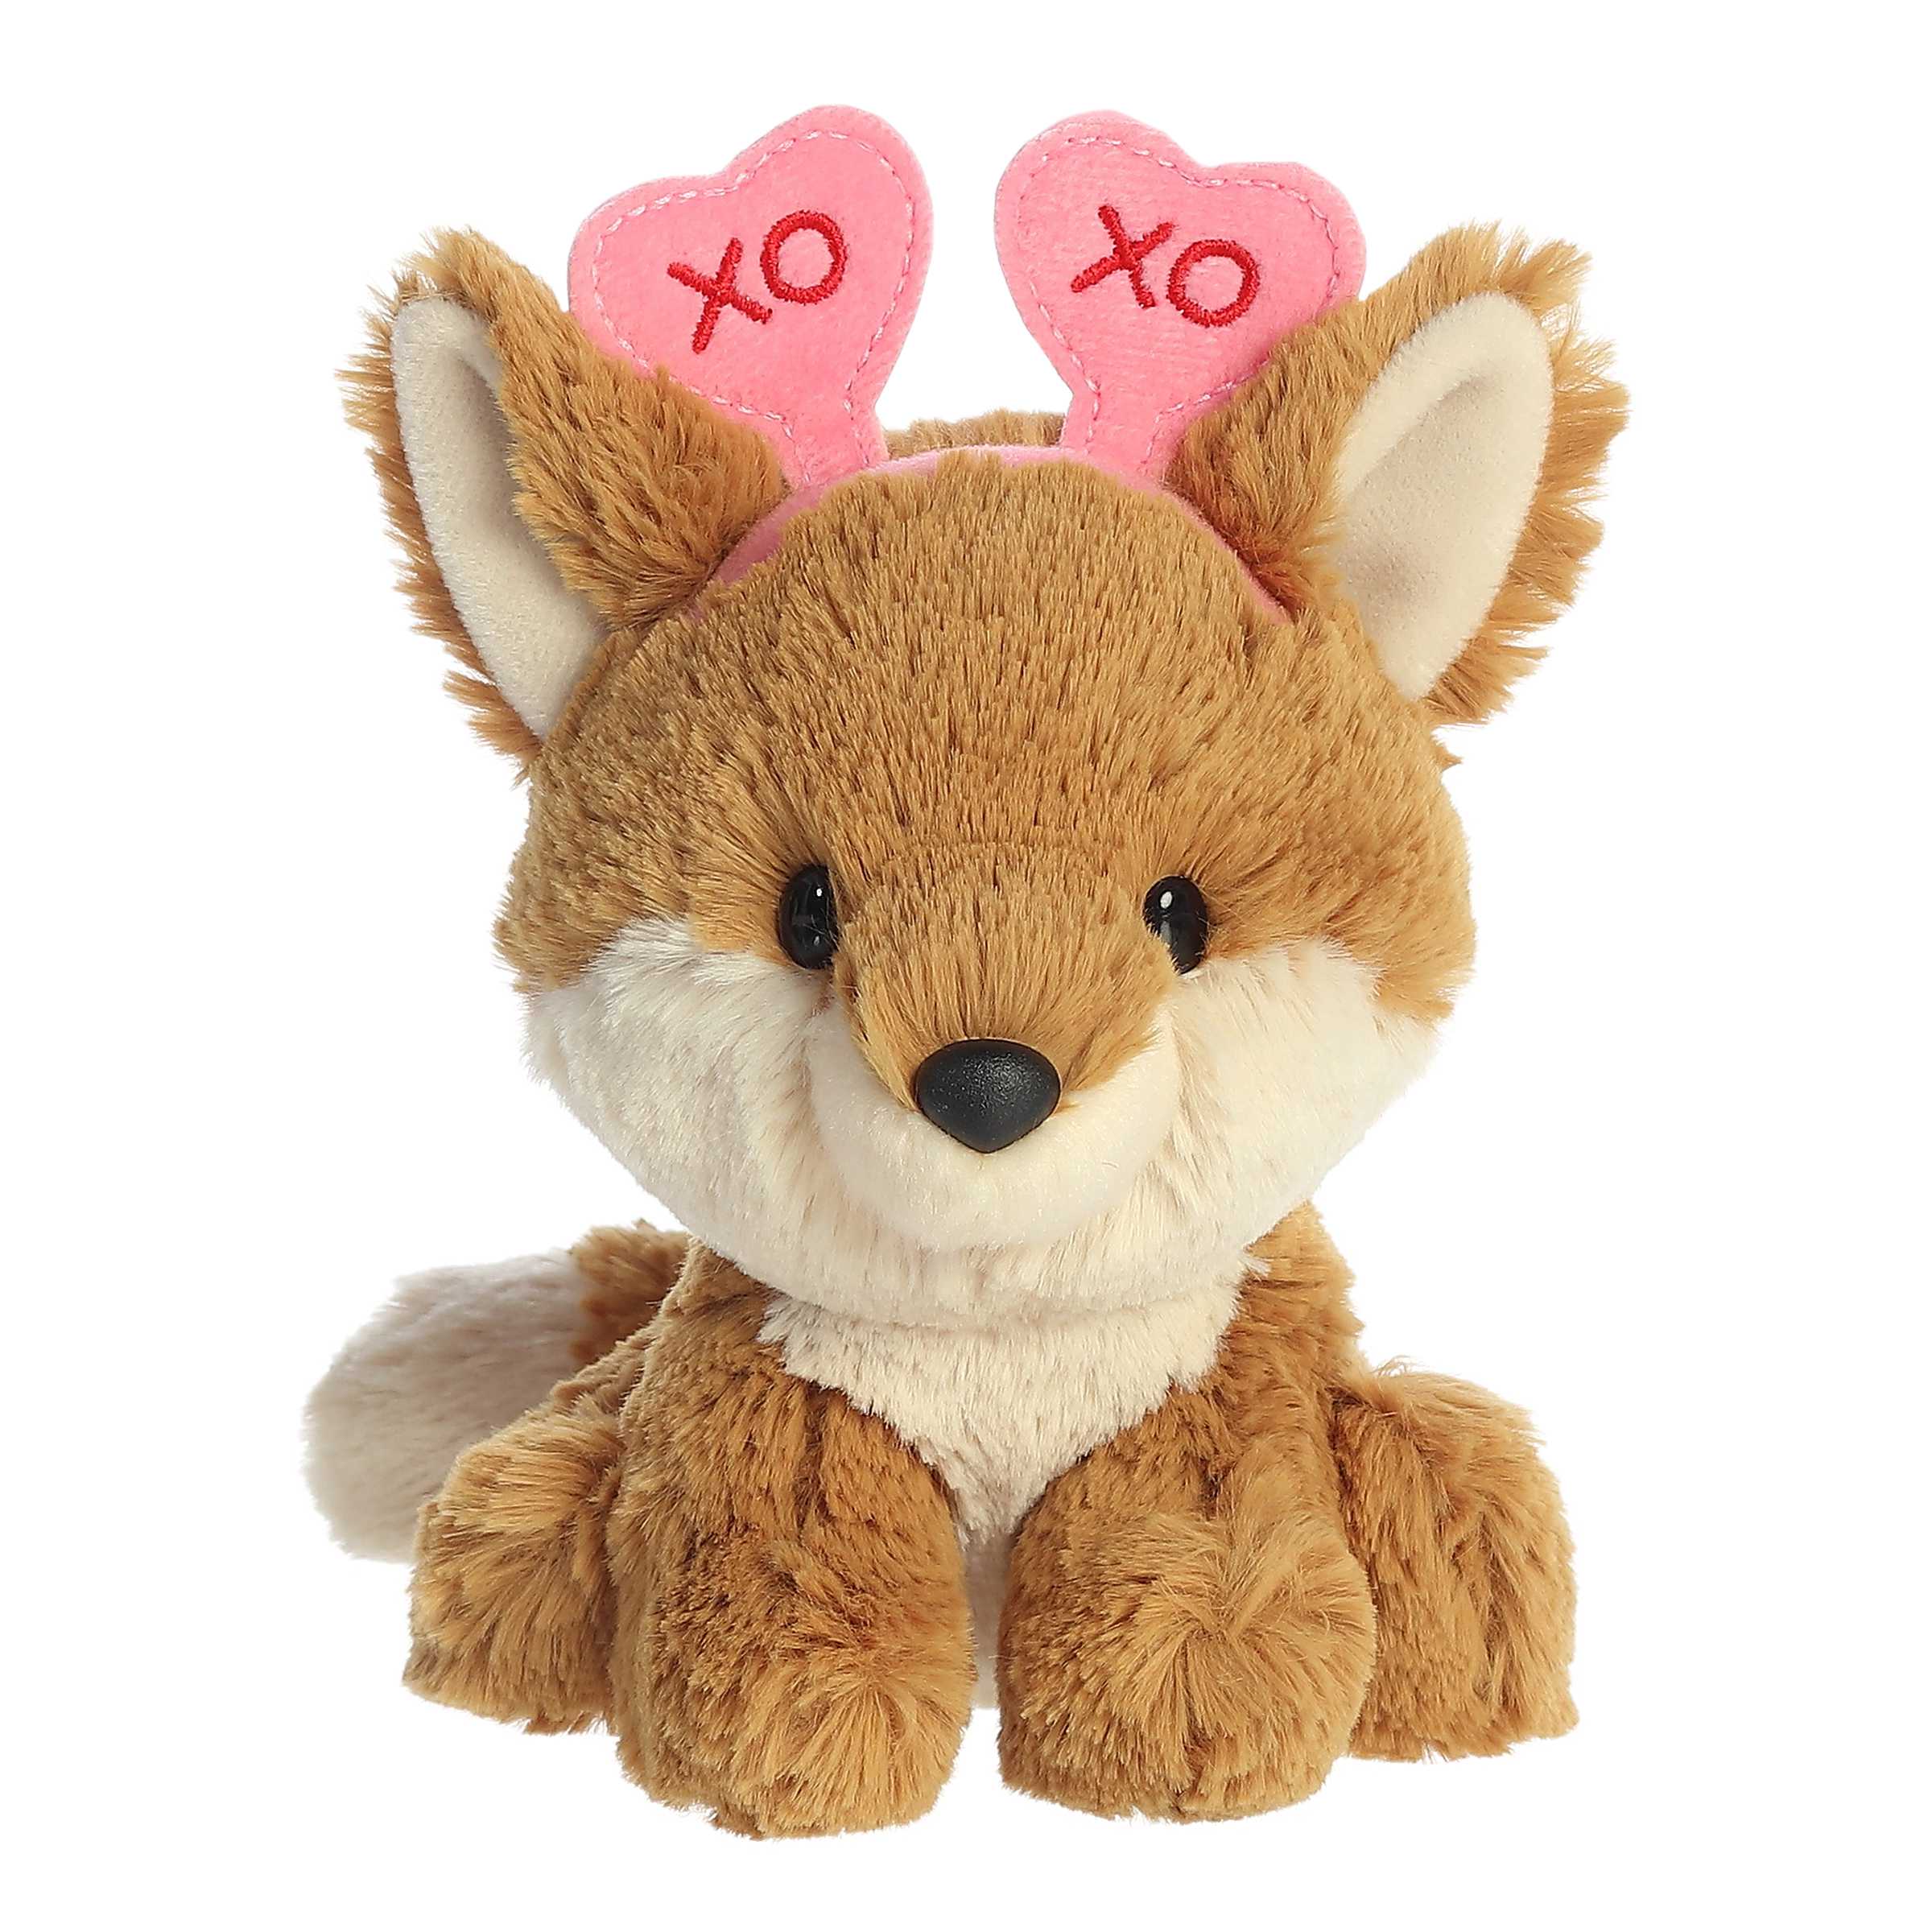 Fox plush from Love On The Mind with a heart-themed 'XOXO' headband, showcasing a charm perfect for Valentine's day